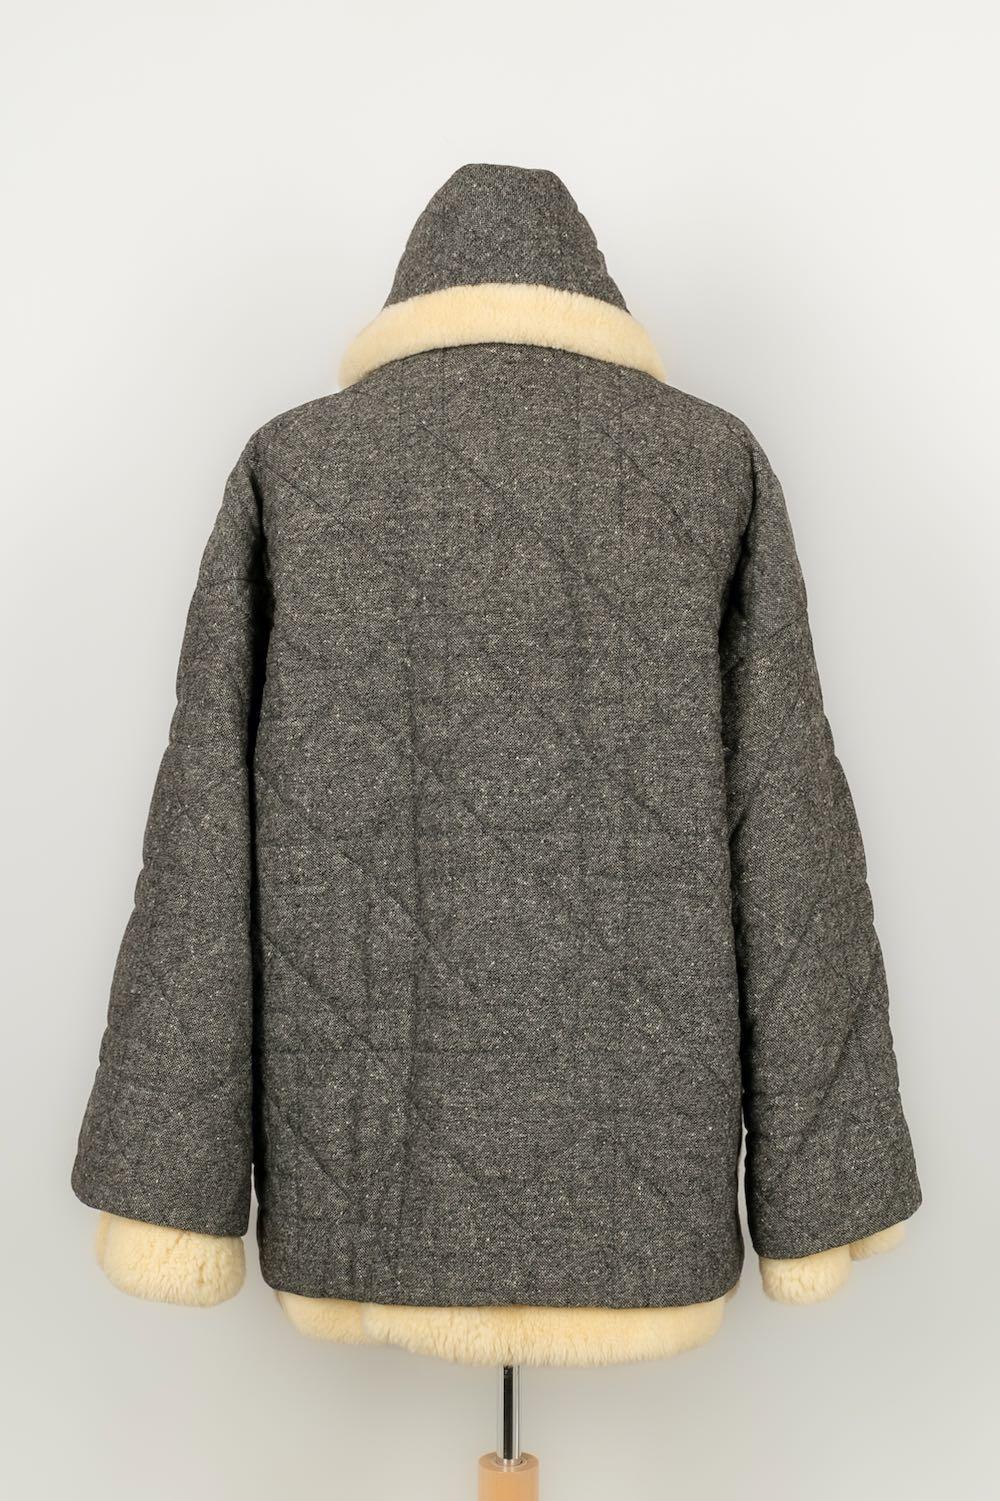 Christian Dior Grey Wool Coat, 2008 For Sale 1